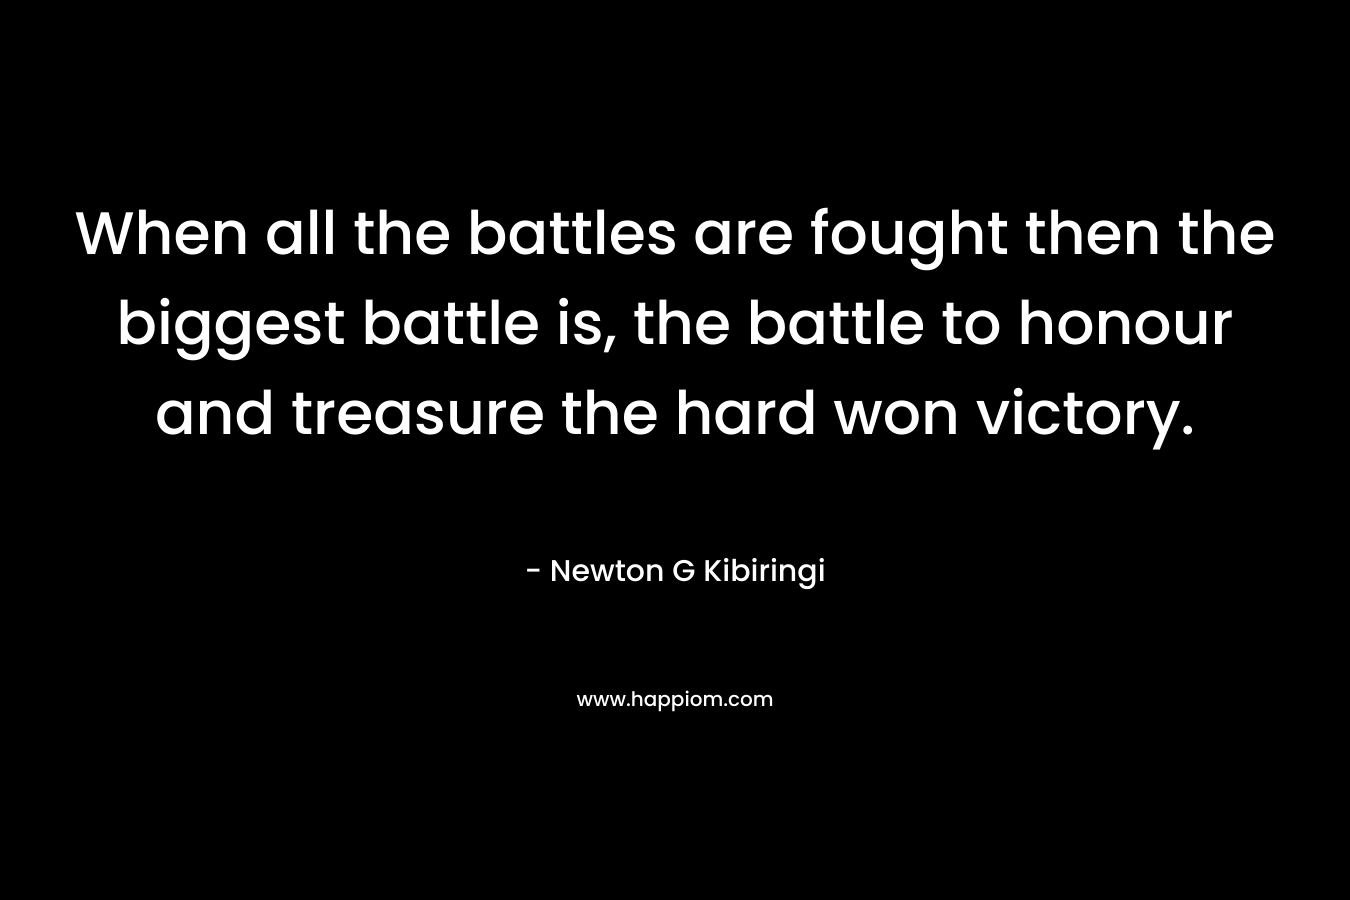 When all the battles are fought then the biggest battle is, the battle to honour and treasure the hard won victory. – Newton G Kibiringi